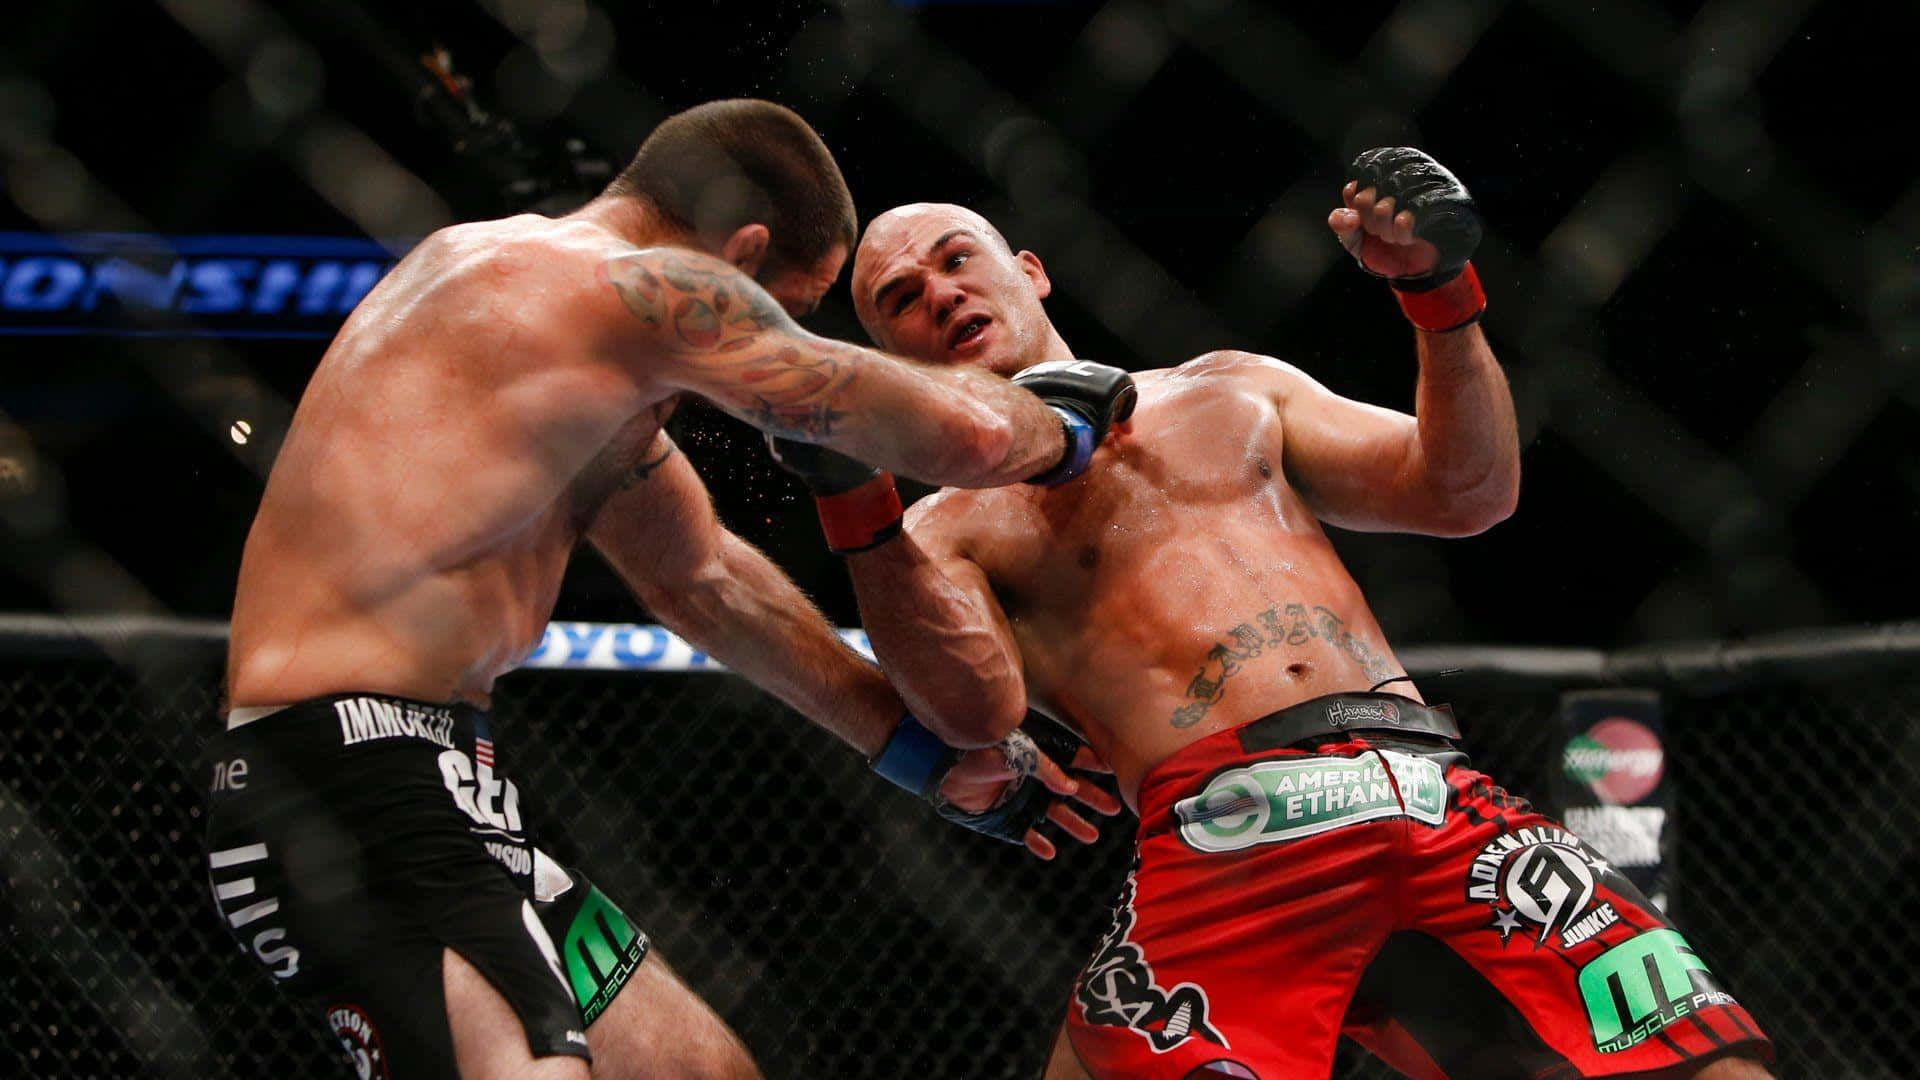 UFC Fighter Robbie Lawler Skillfully Dodges an Attack Wallpaper